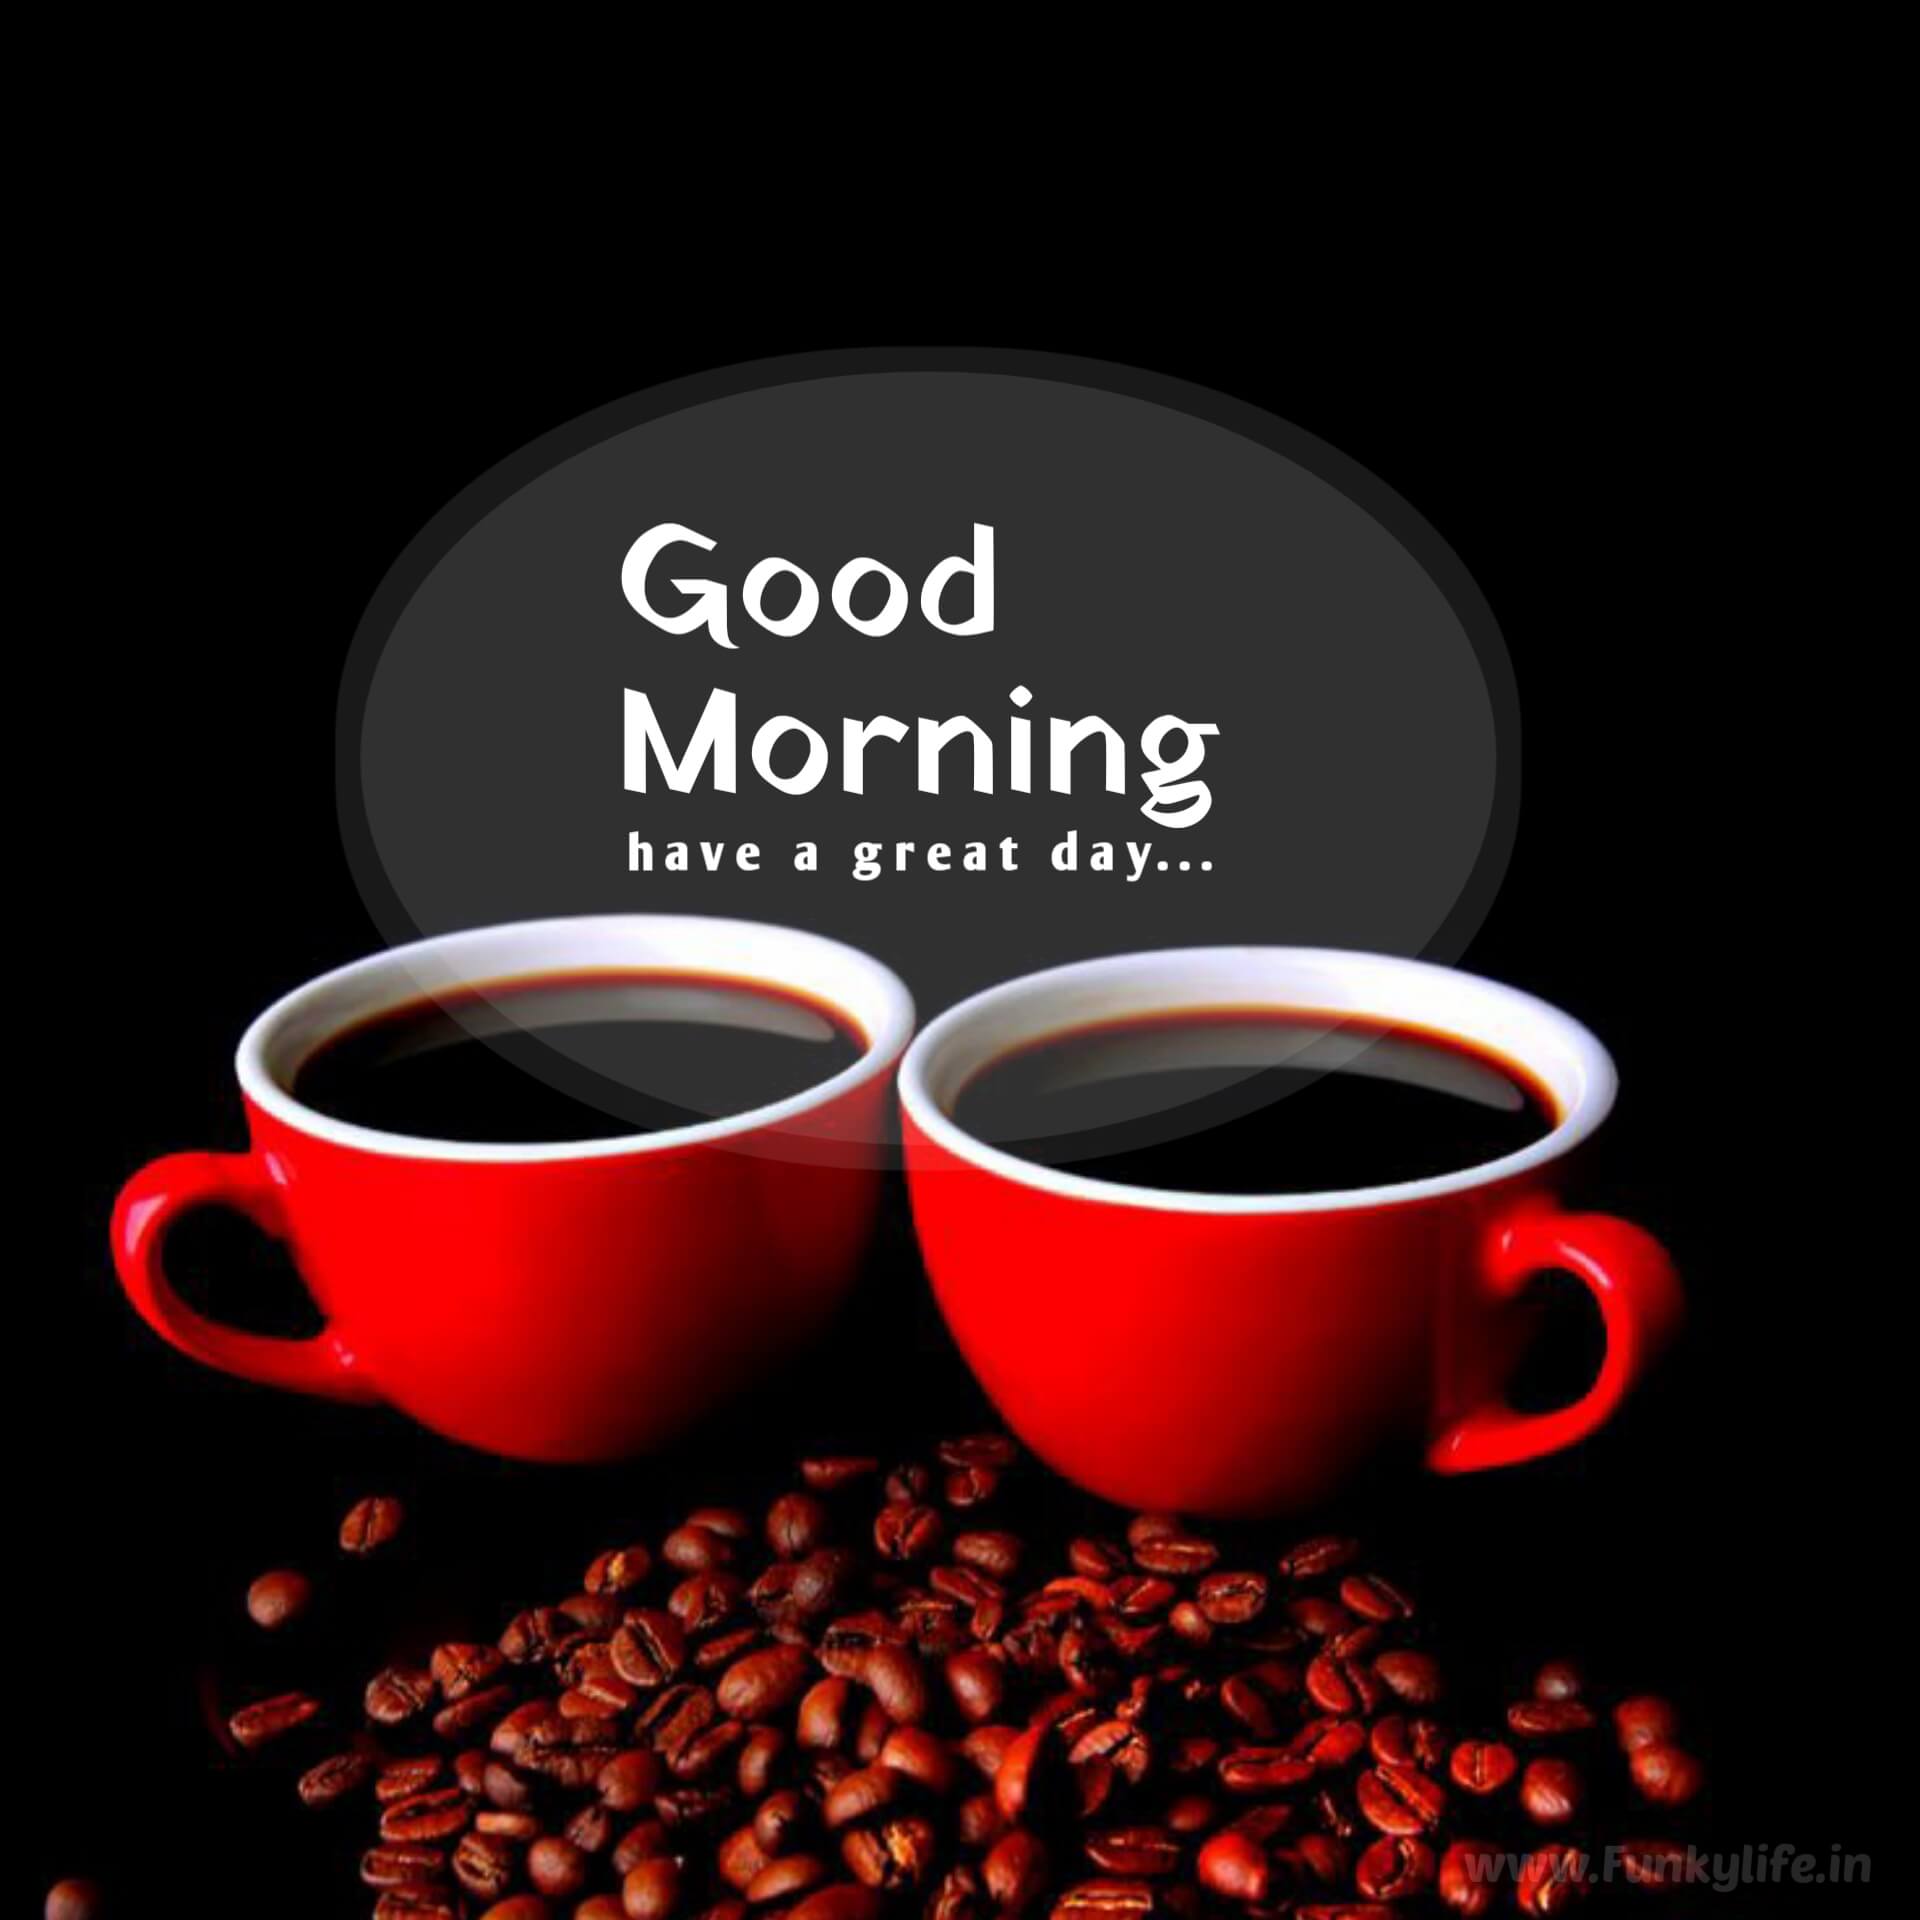 Black Coffee Good Morning Images